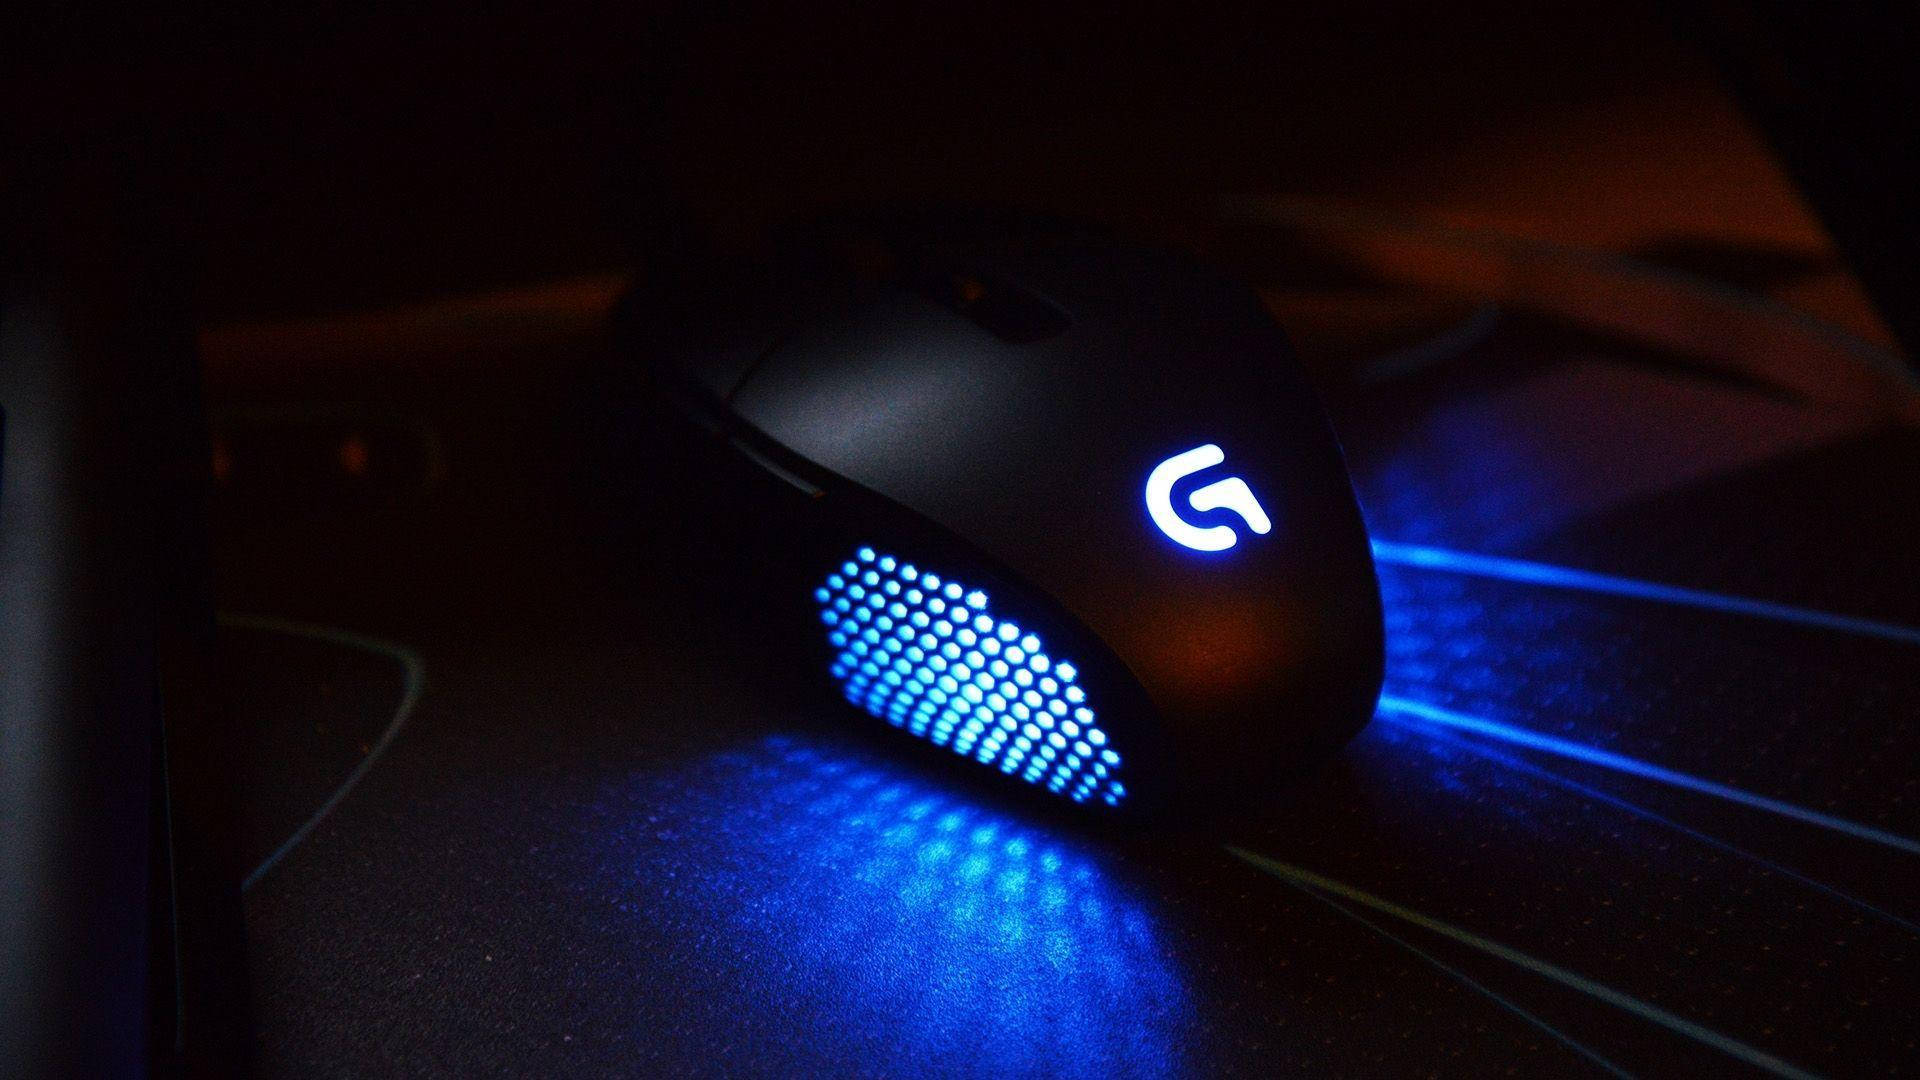 Glowing Logitech Mouse Background